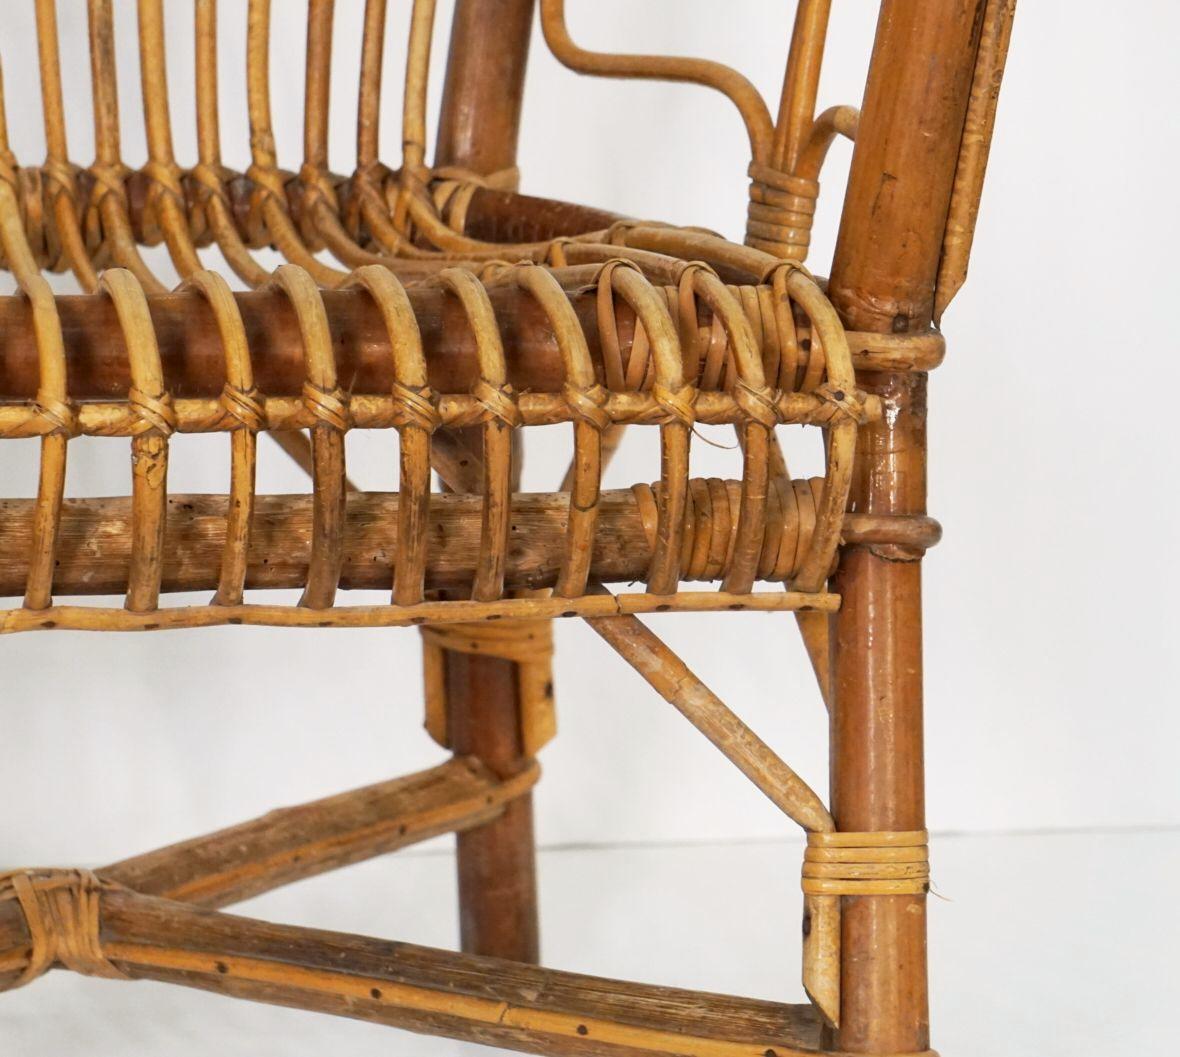 Italian Fan-Backed Arm Chairs of Rattan and Bamboo from the Mid-20th Century For Sale 8